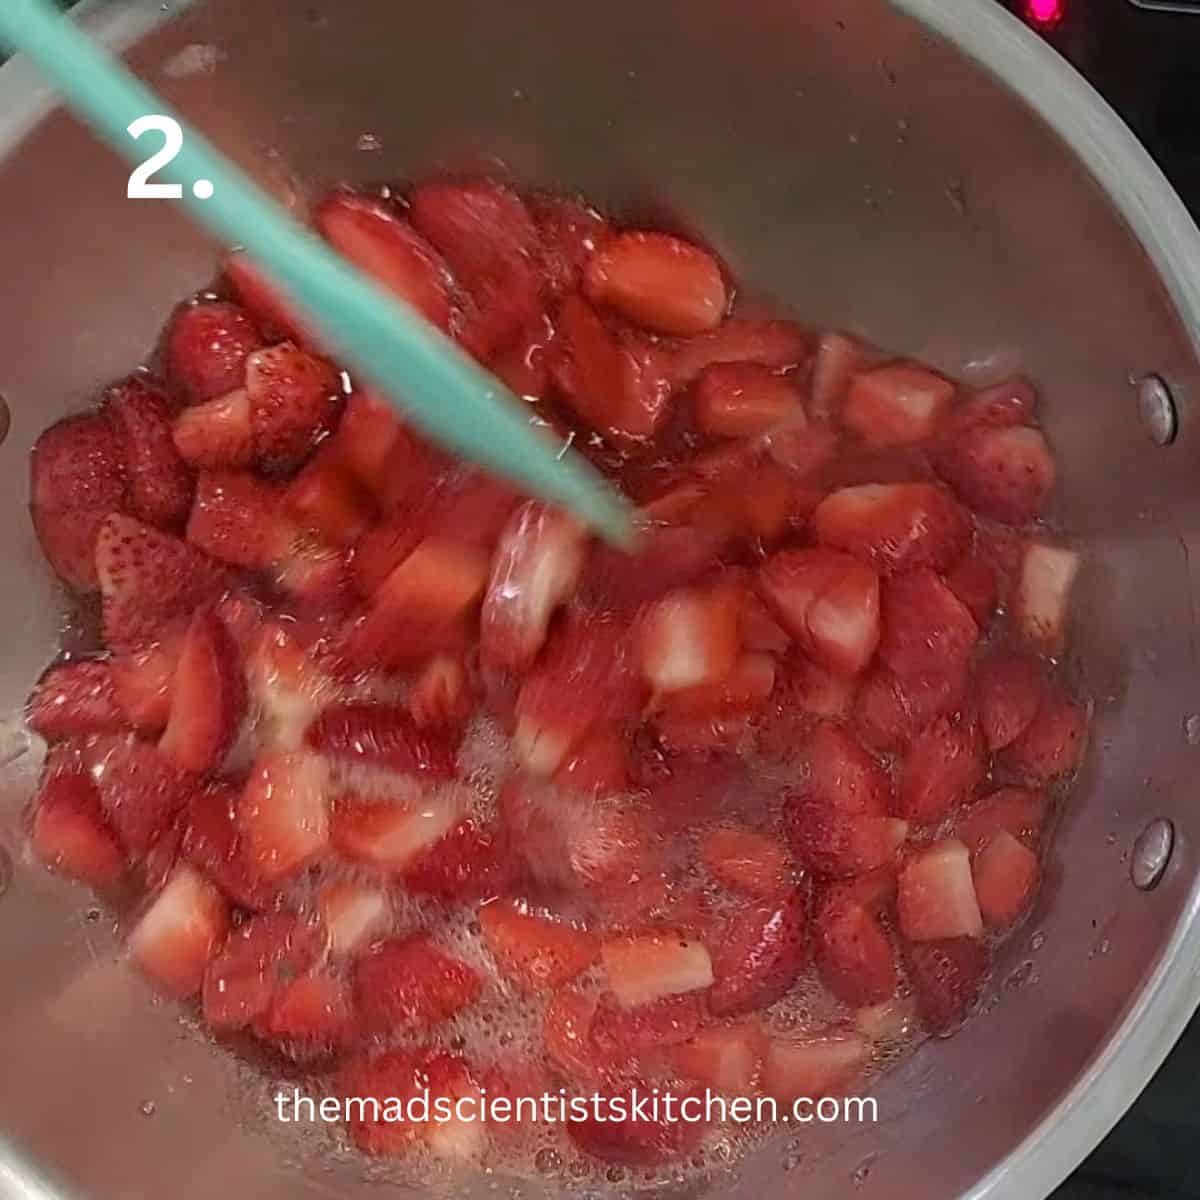 Cooking the berries for strawberry sauce